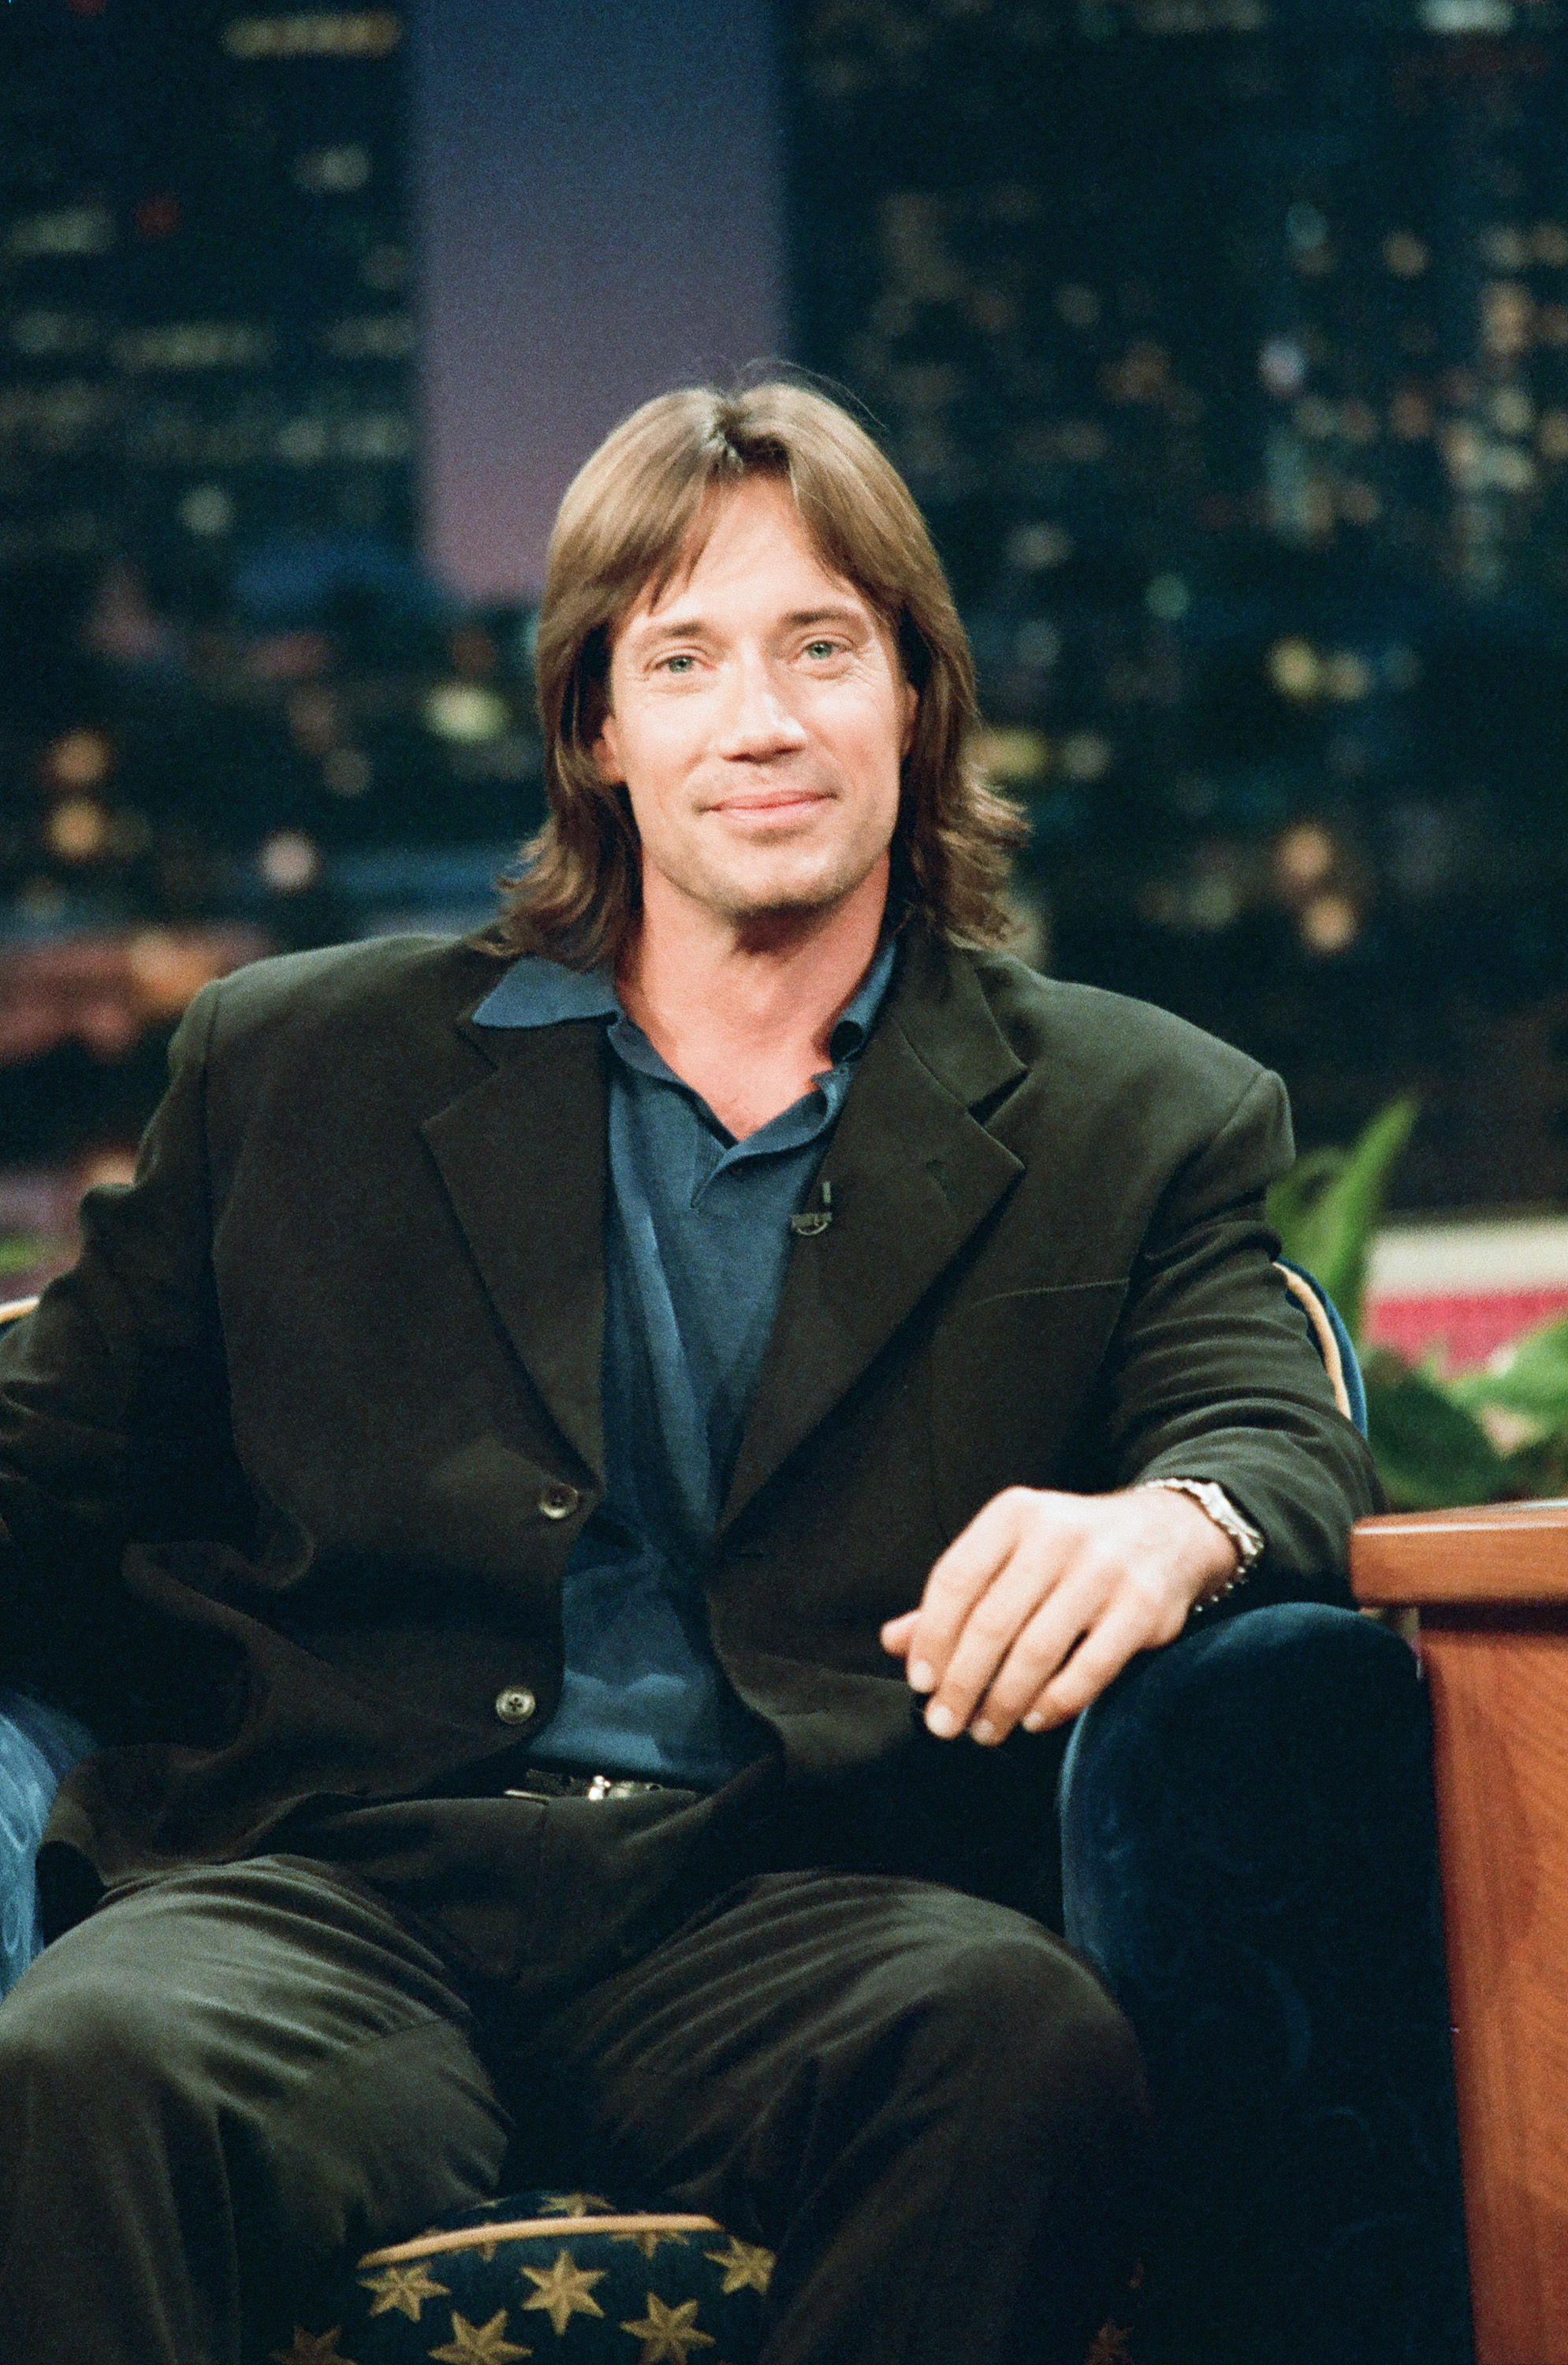 Kevin Sorbo on an episode of "The Tonight Show with Jay Leno" on August 15, 1997 | Source: Getty Images